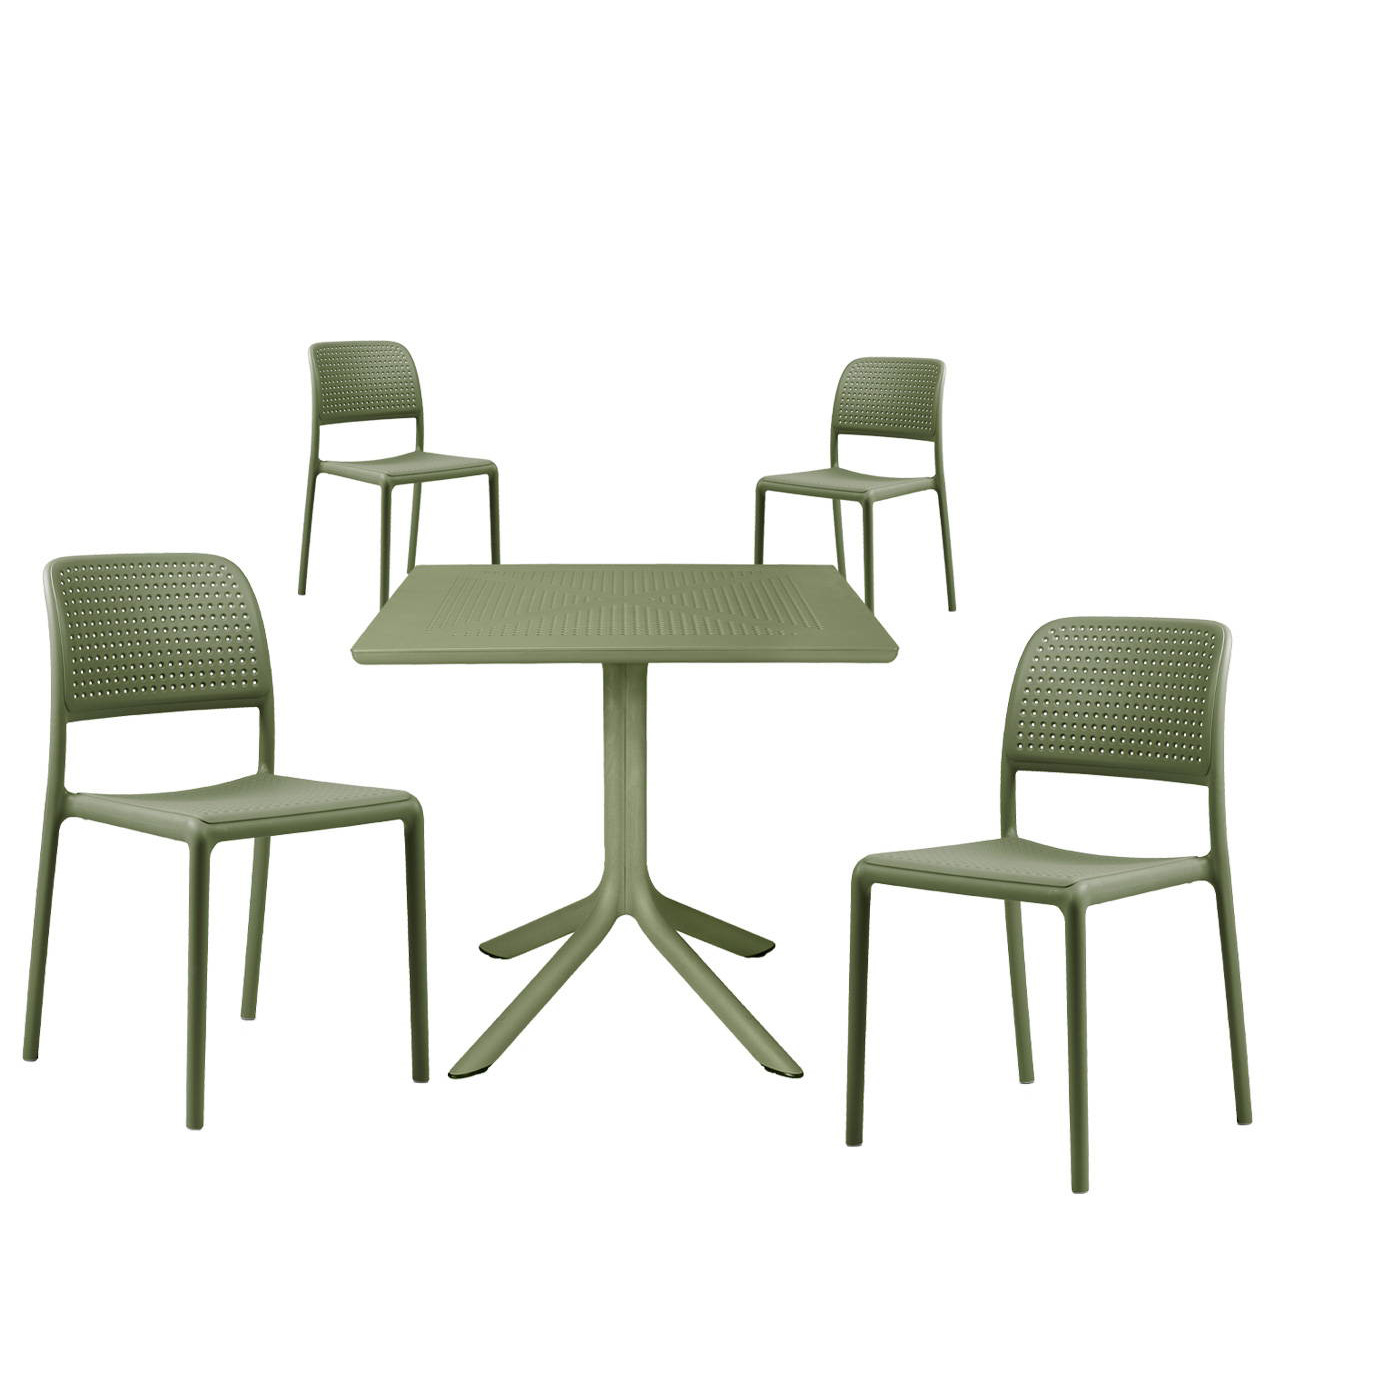 Great Value Garden Furniture Table & Chair Sets - Designed & Made In Italy